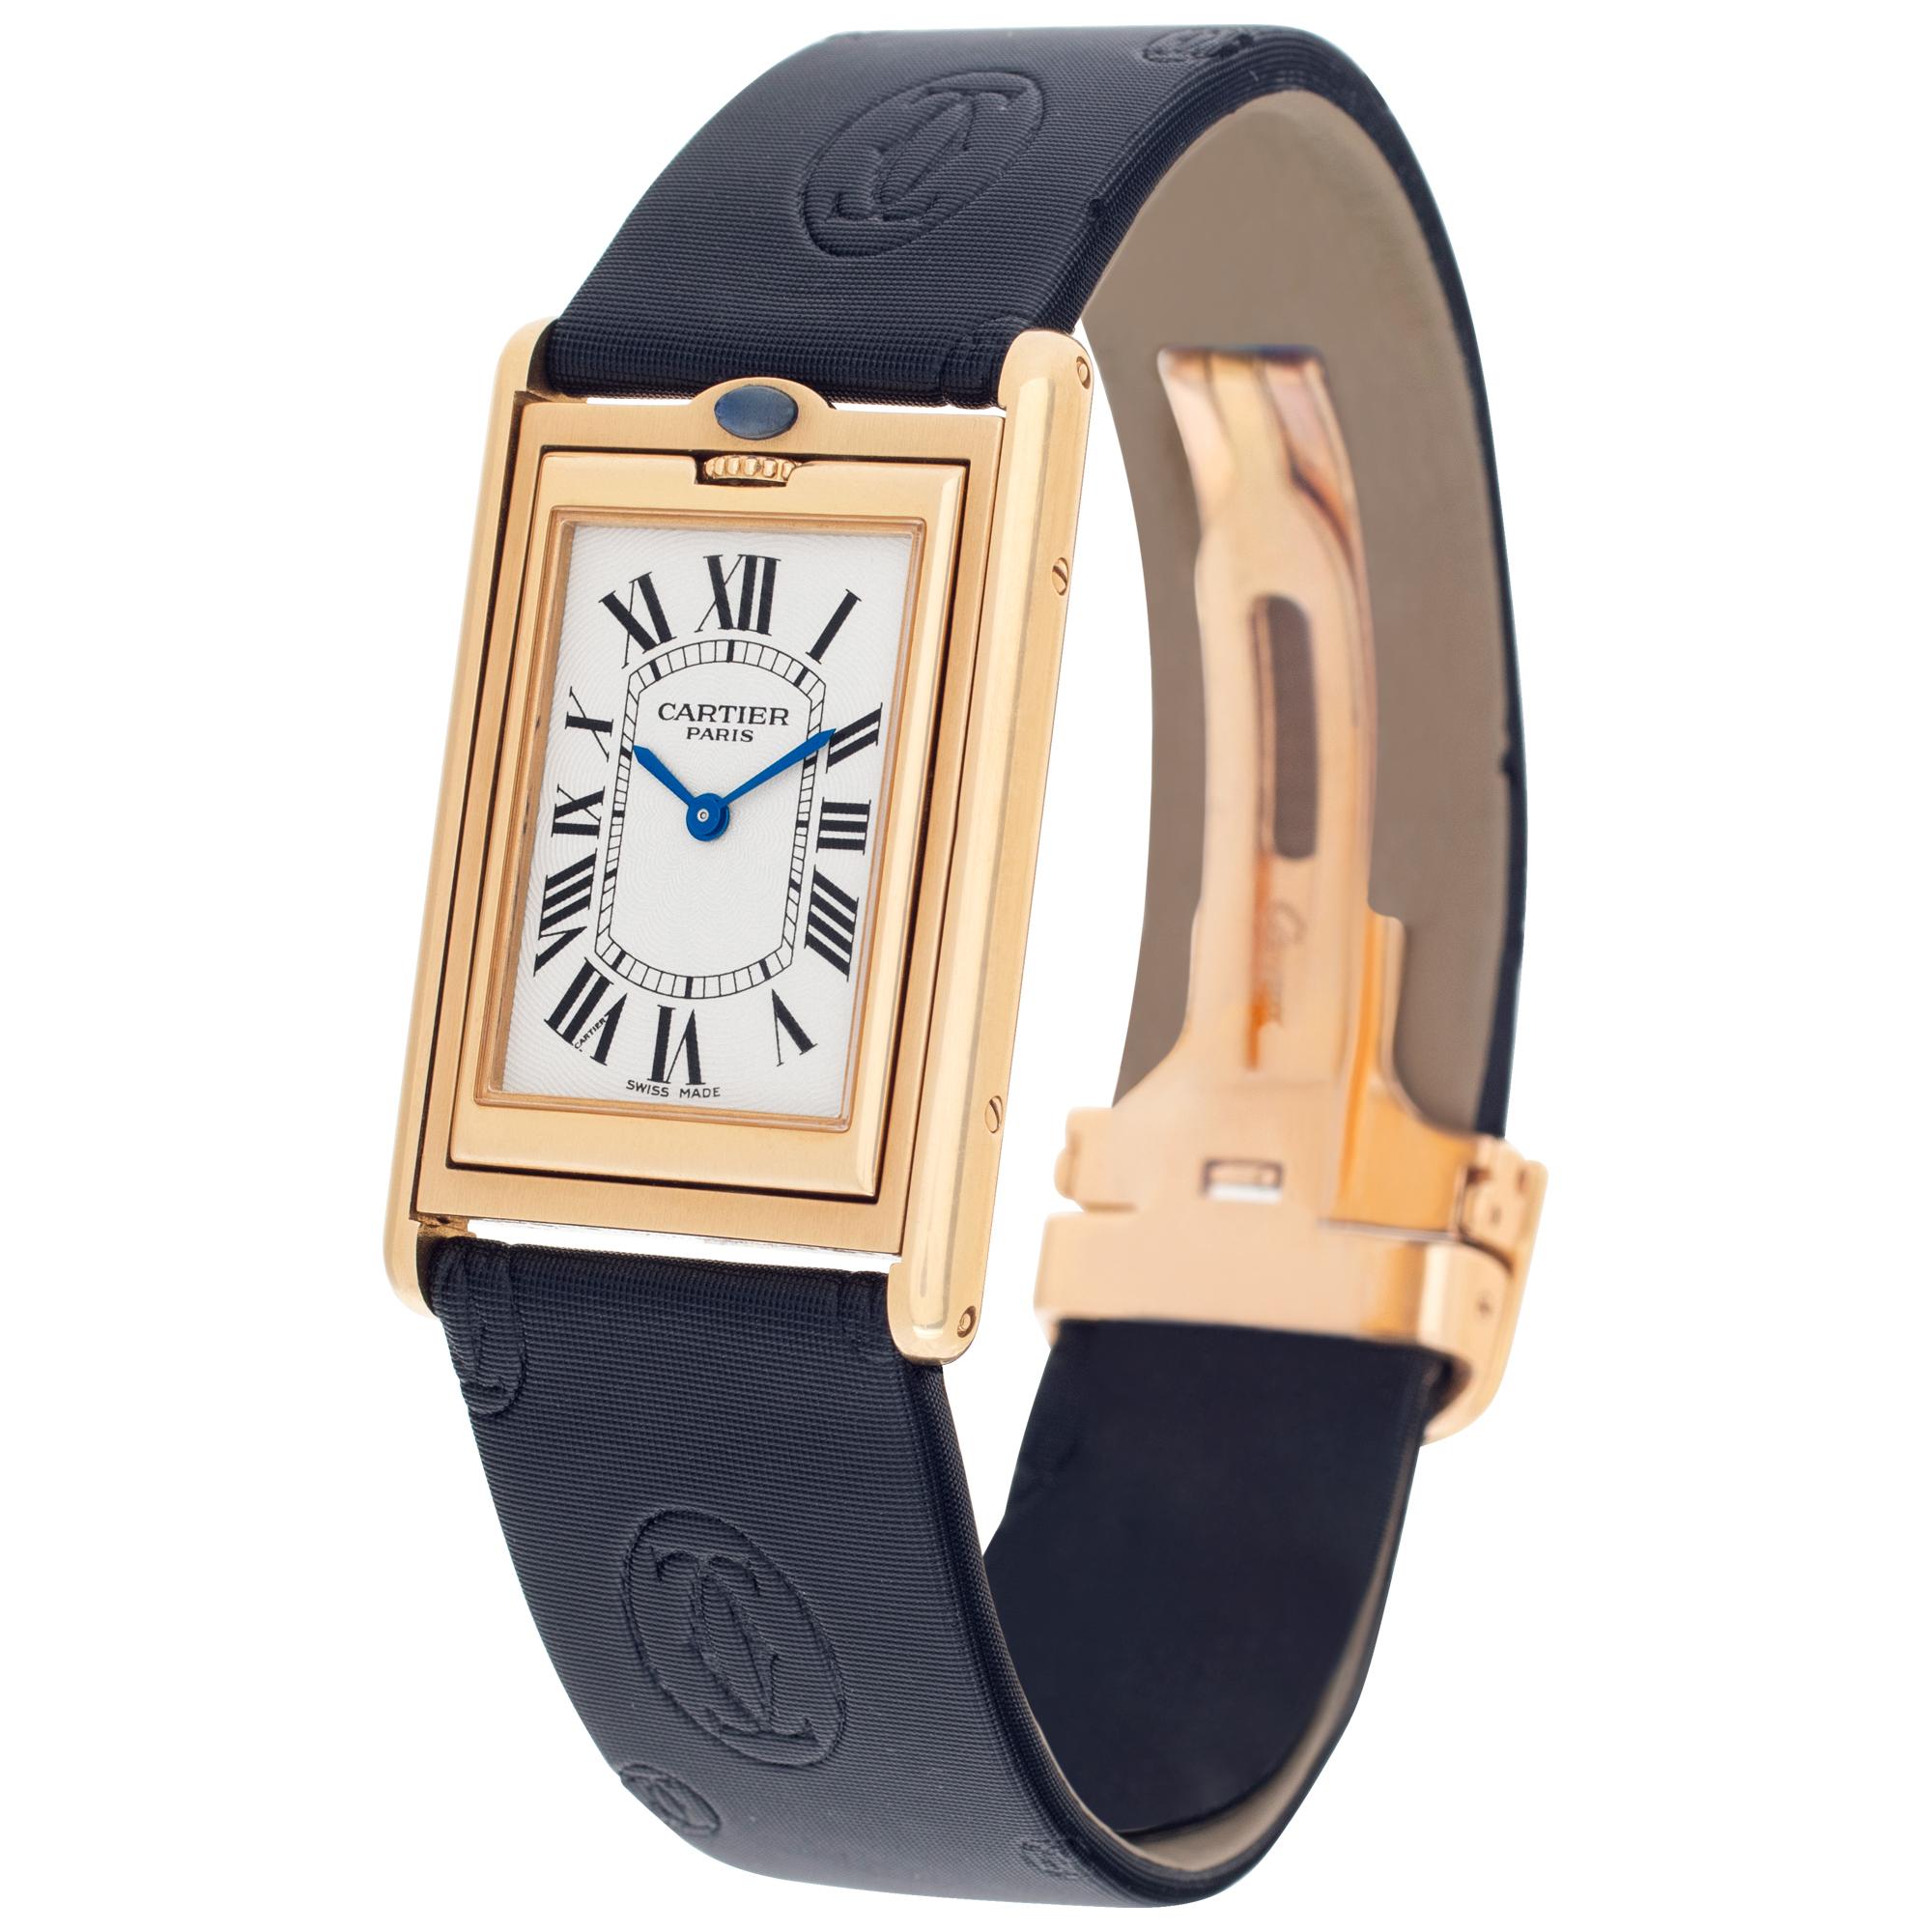 Limited Edition Cartier Tank Basculante Millenium CPCP Collection Privee Cartier Paris in 18k yellow gold on a satin strap with 18k deployant buckle. Manual wind. 25 mm x 39 mm case size (including lugs). Limited Edition of 365 pieces - made in 2000